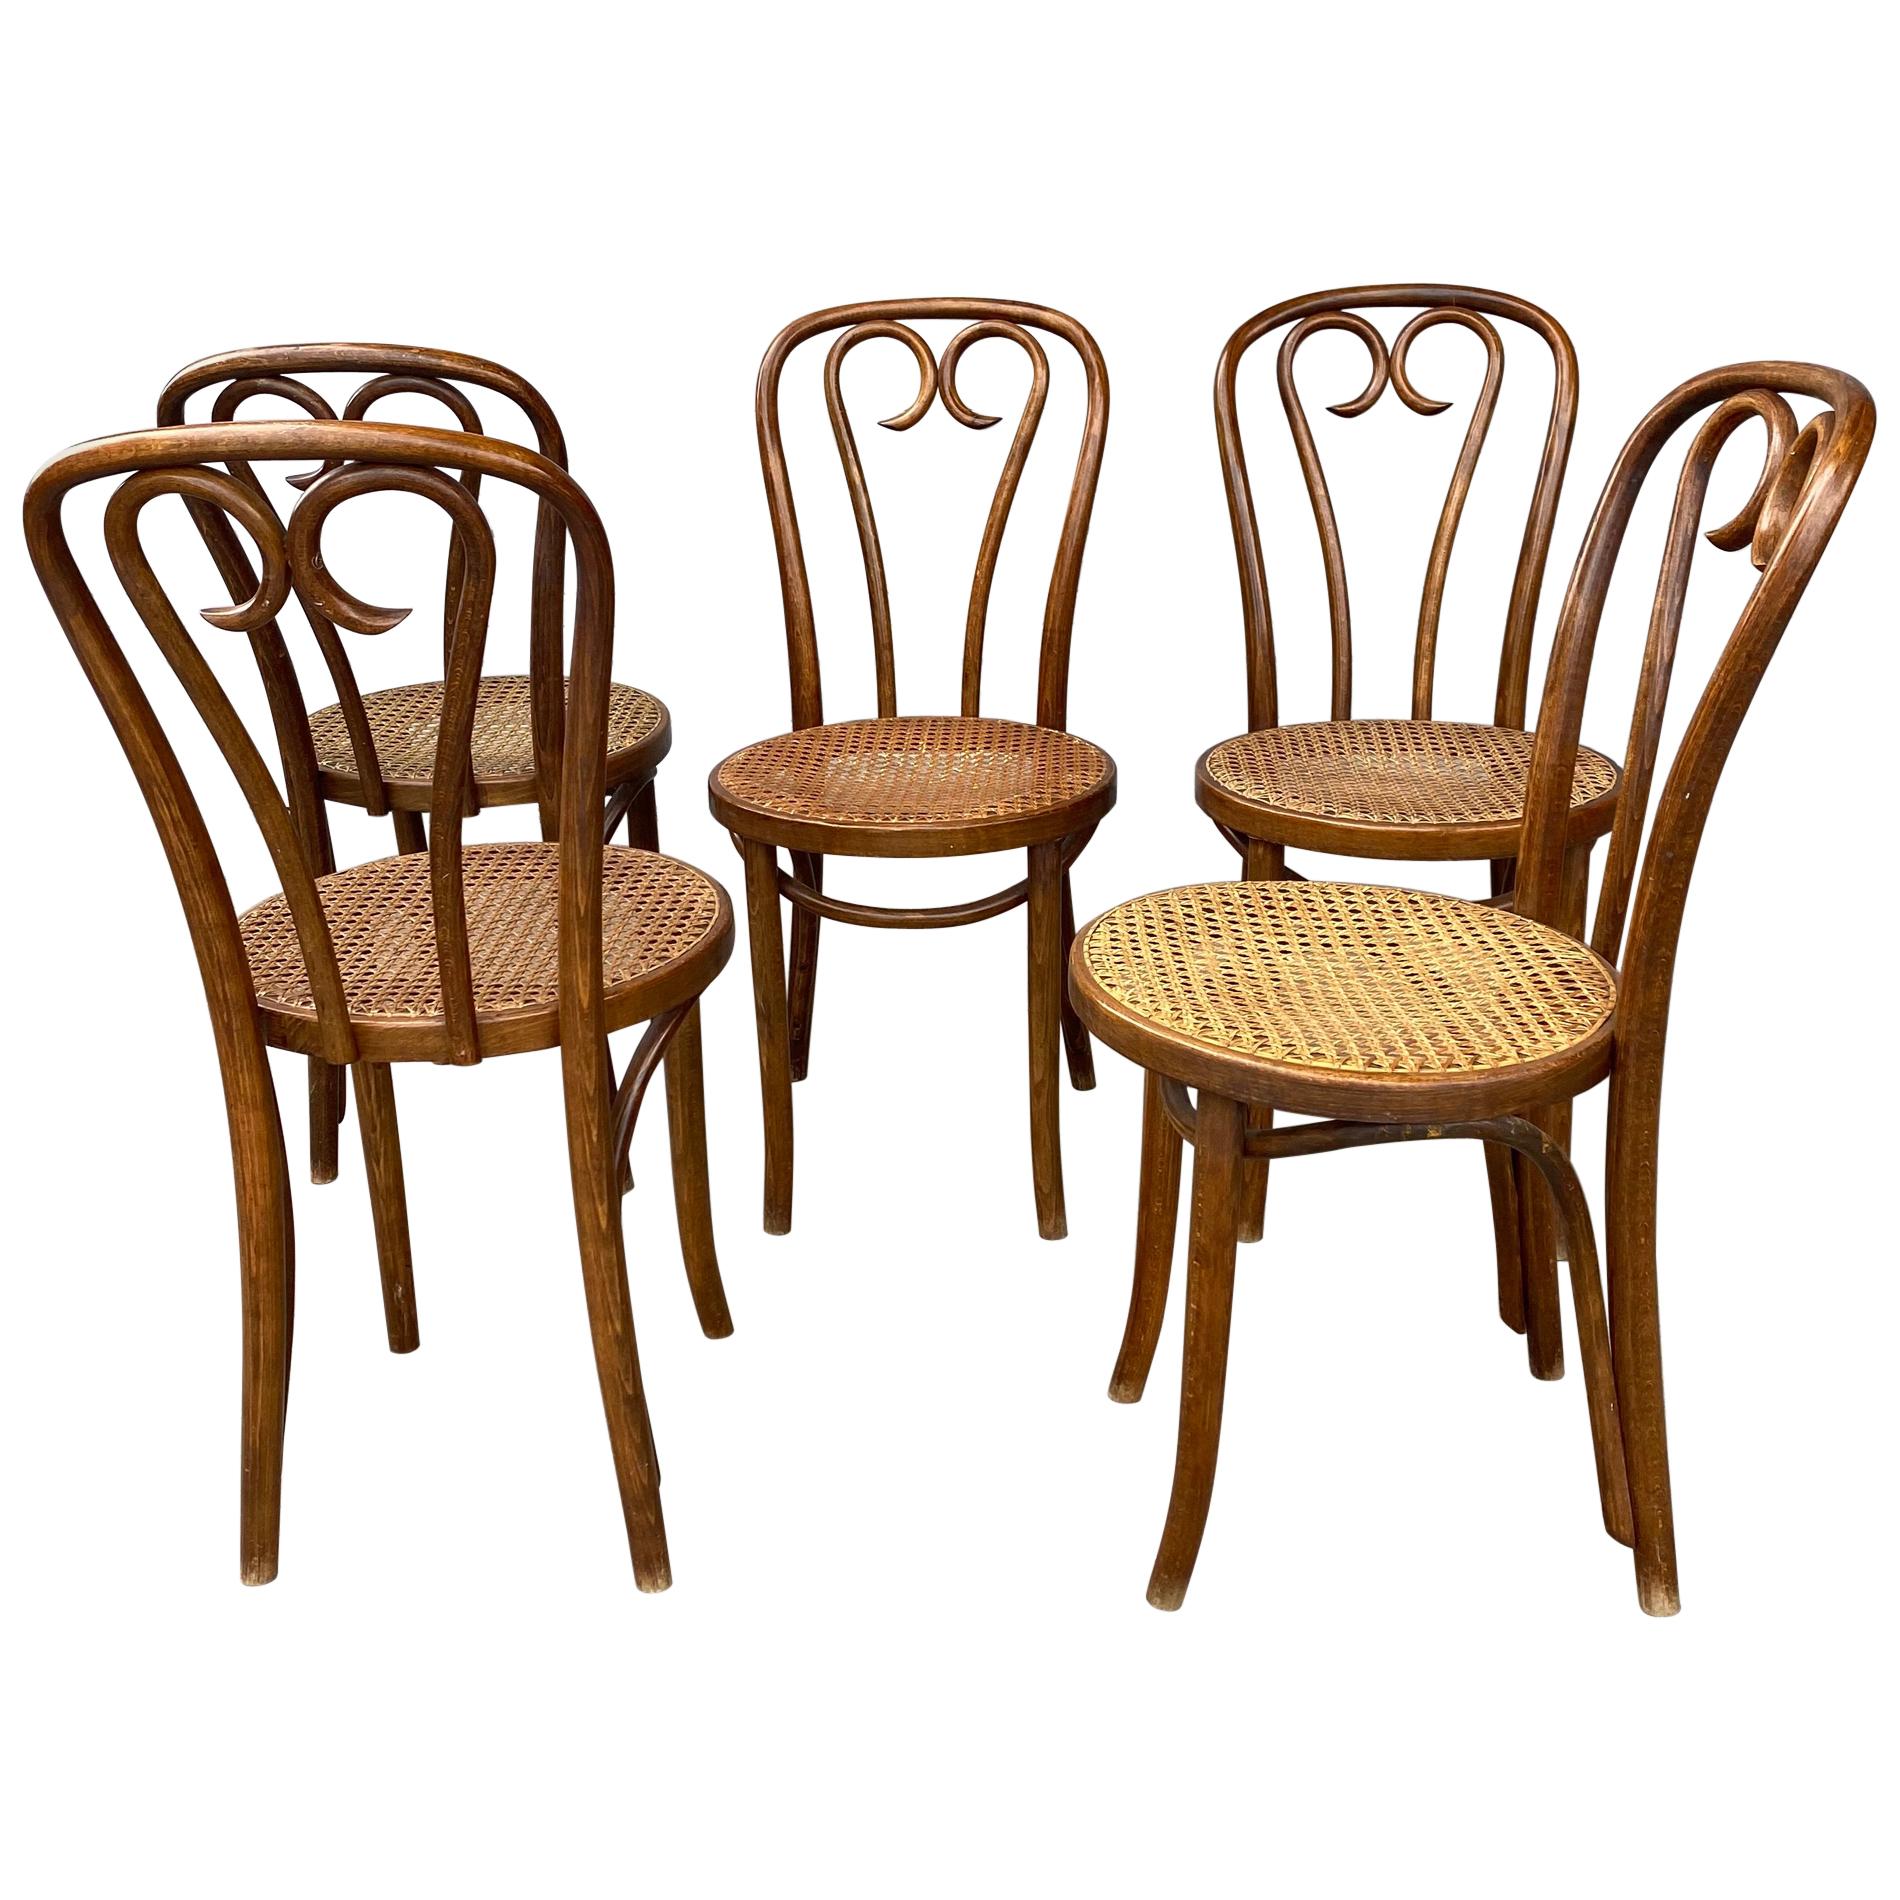 Set '5' Thonet Bentwood Cafe Bistro Dining Chairs, Caned Seats